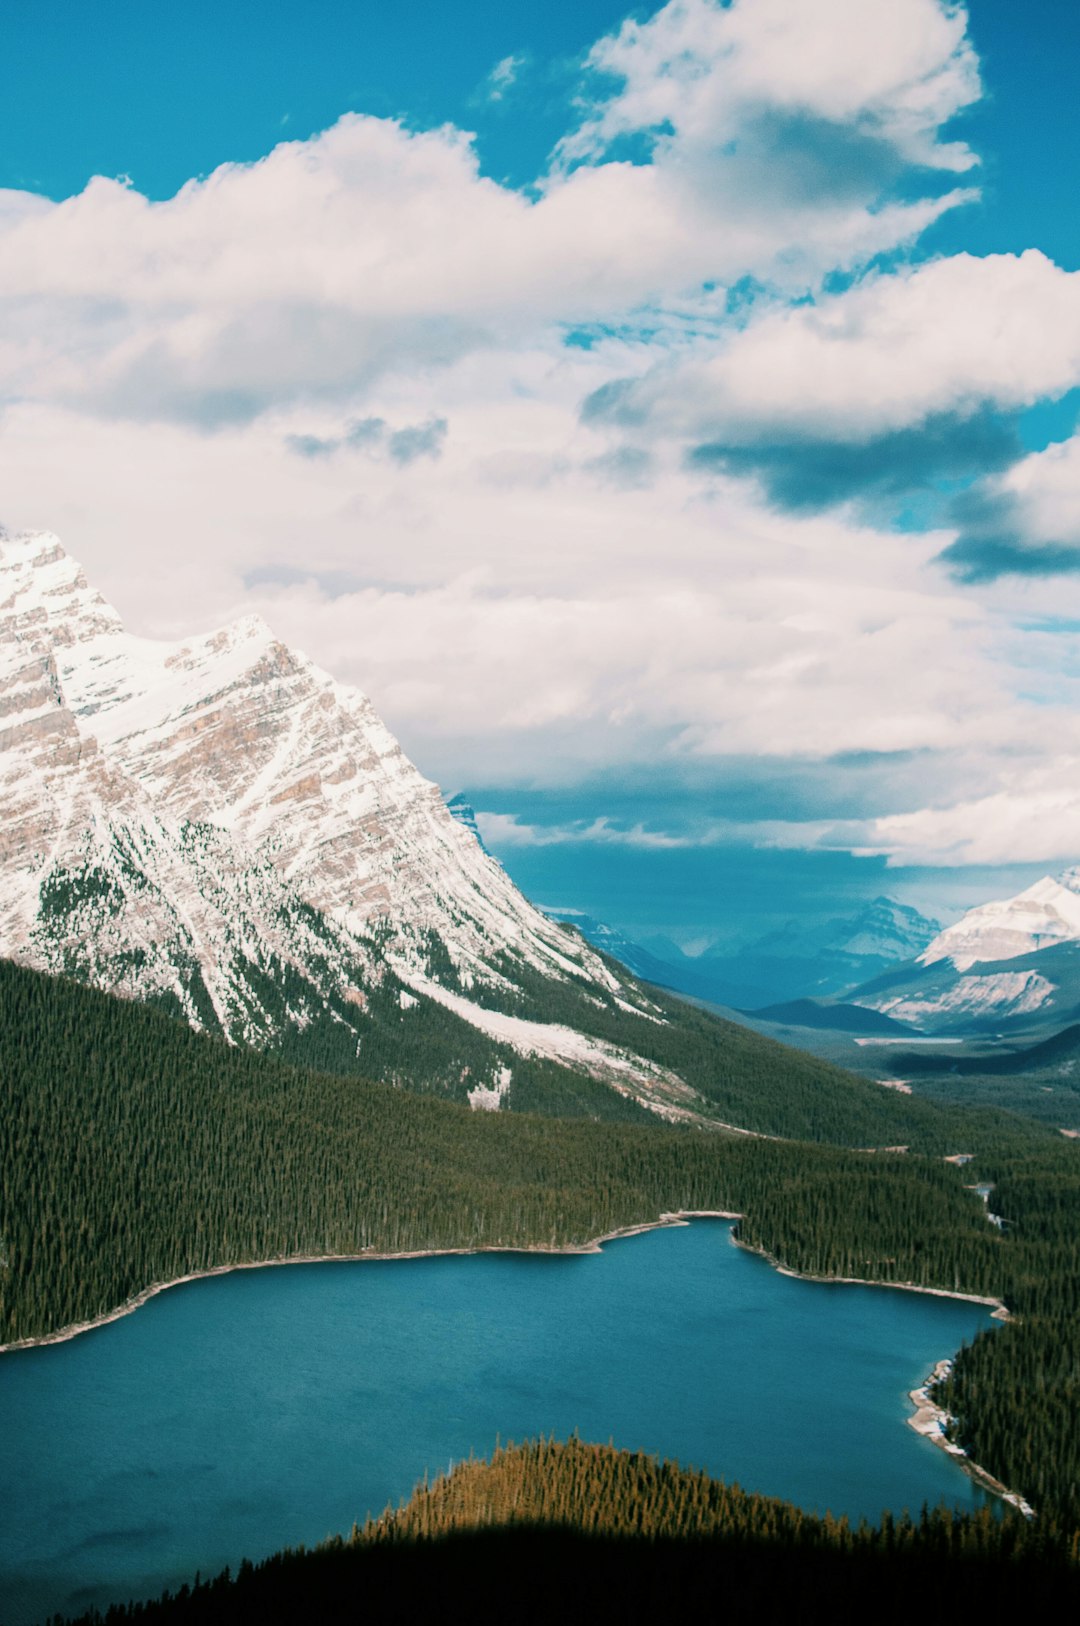 Travel Tips and Stories of Peyto Lake in Canada